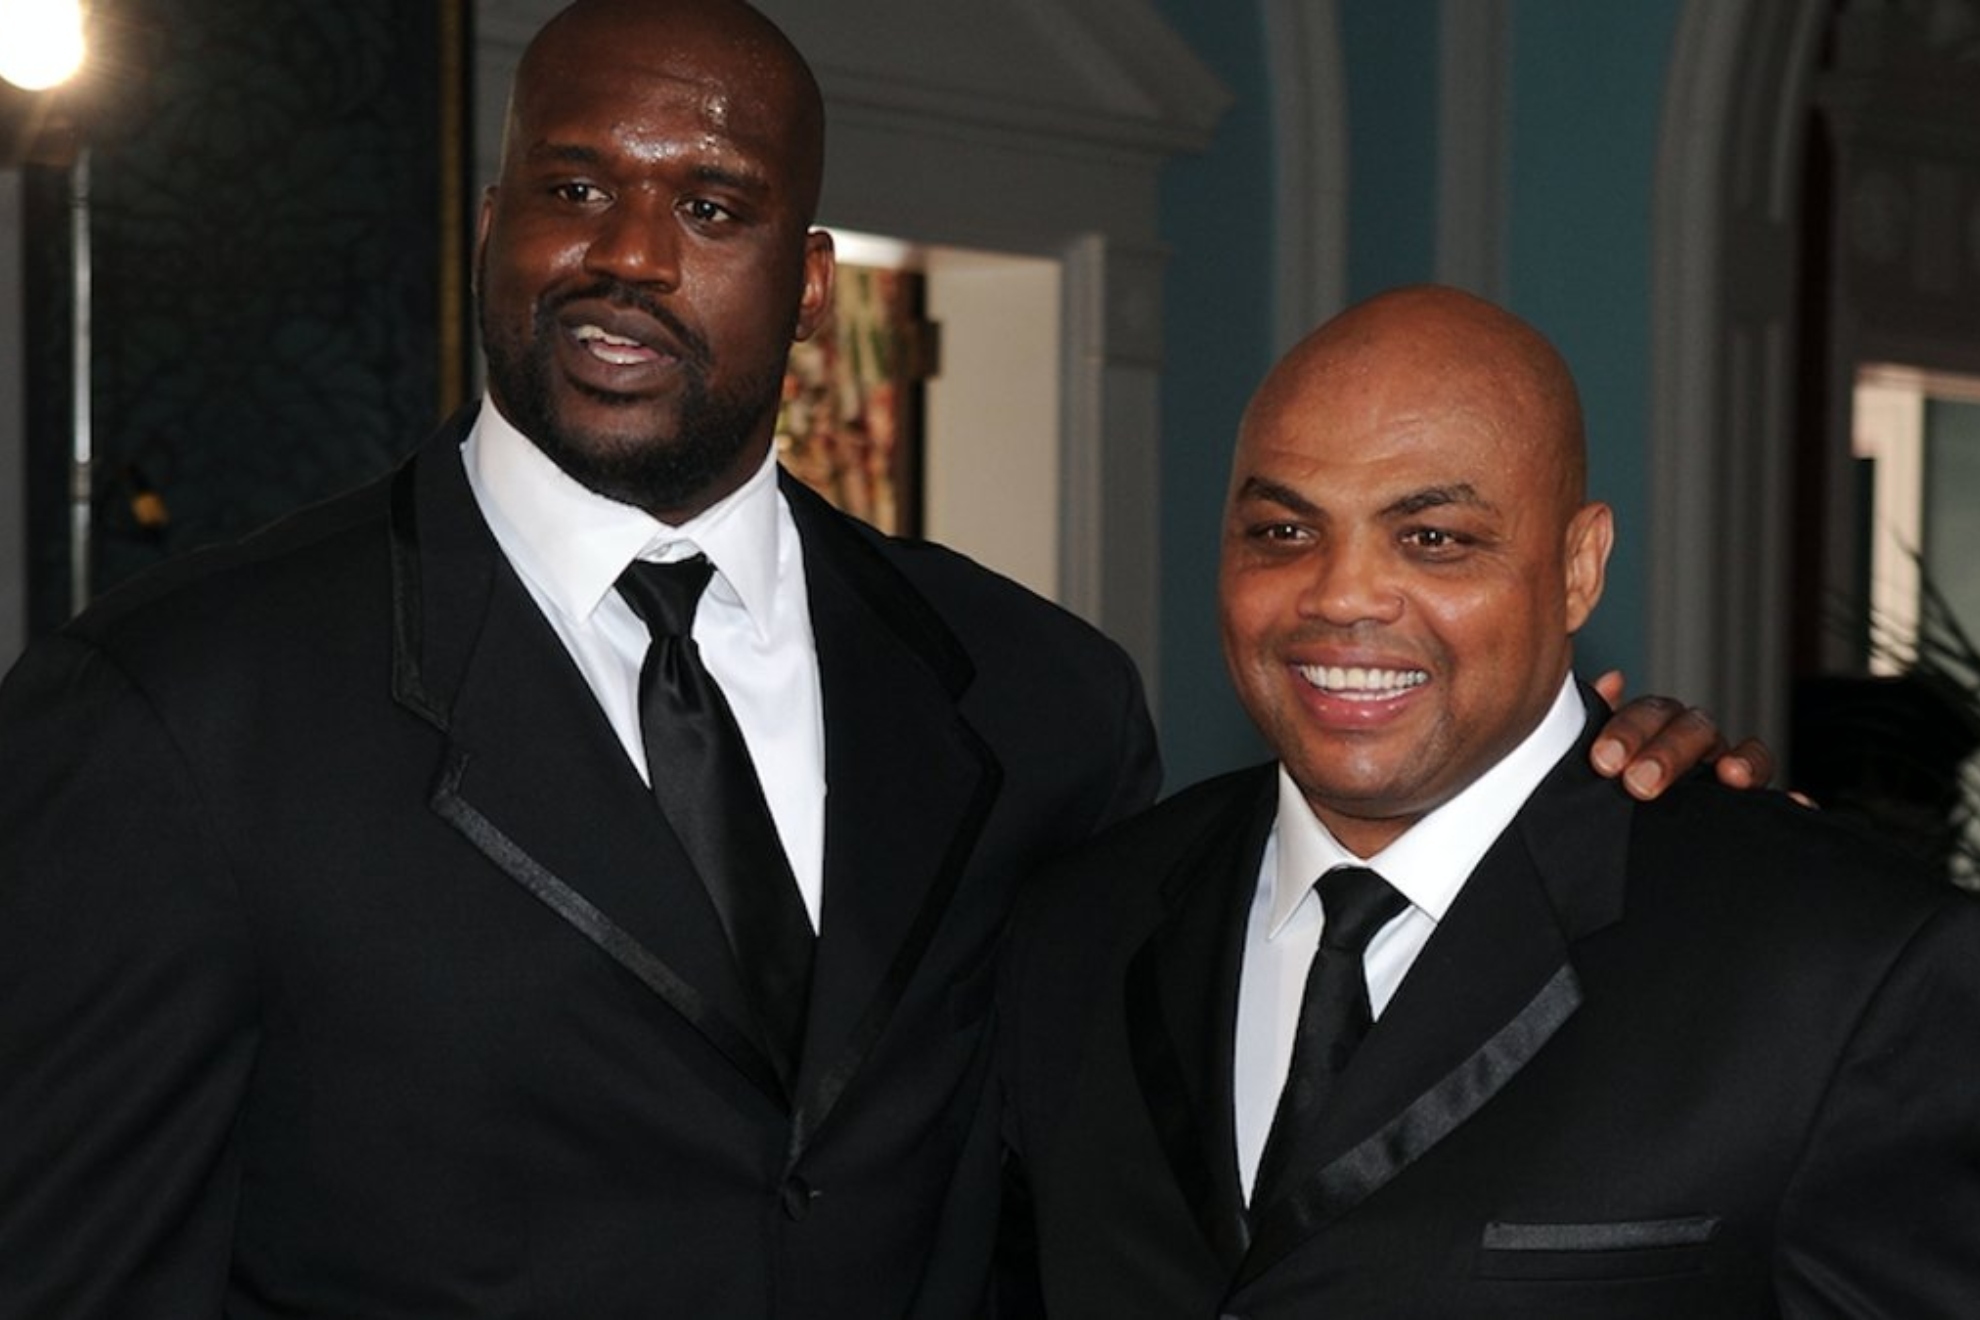 Charles Barkley fires back at Shaquille O'Neil after fat shame jokes while challenging Patrick Mahomes and Travis Kelce